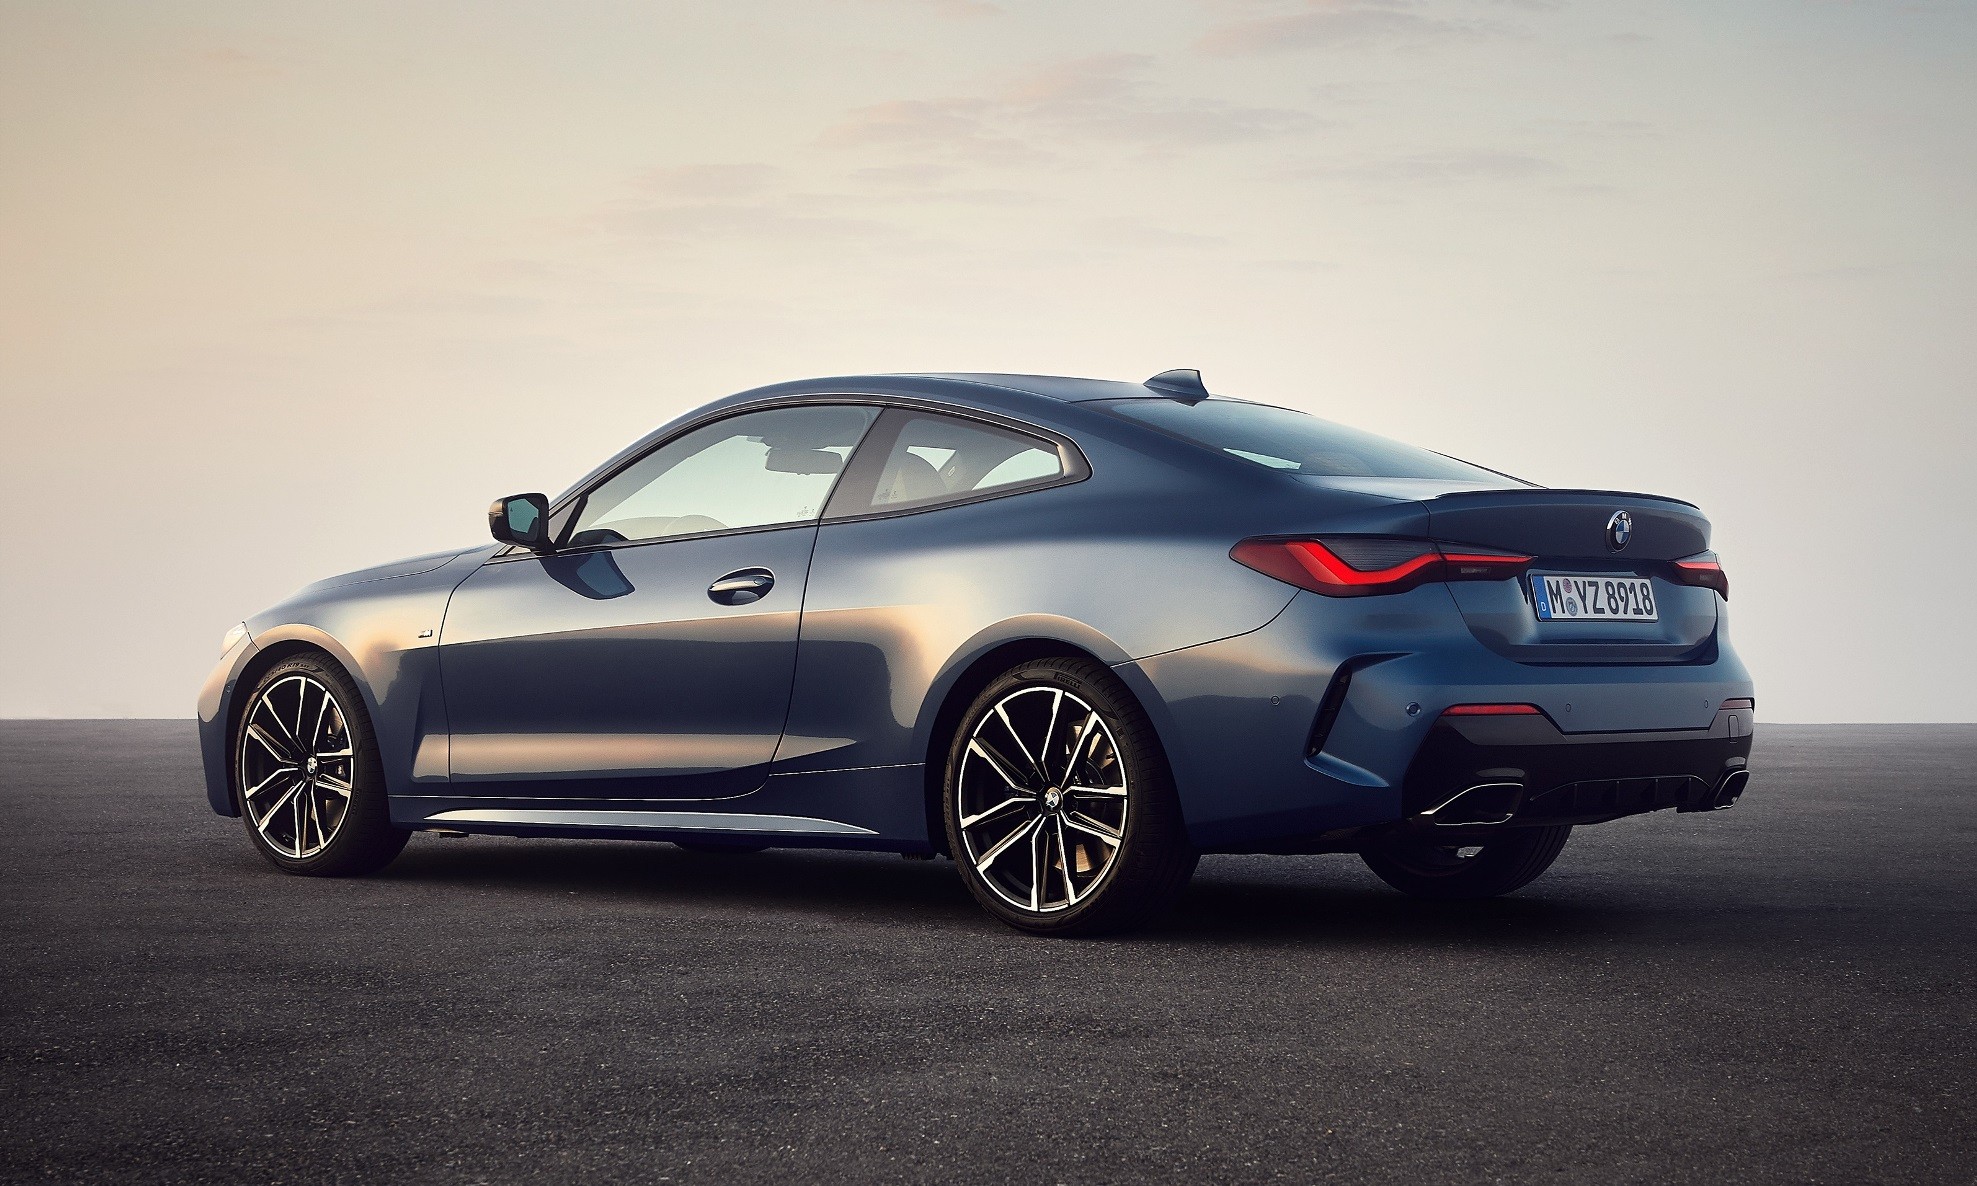 BMW 4 Series Coupe unveiled via virtual launch this evening